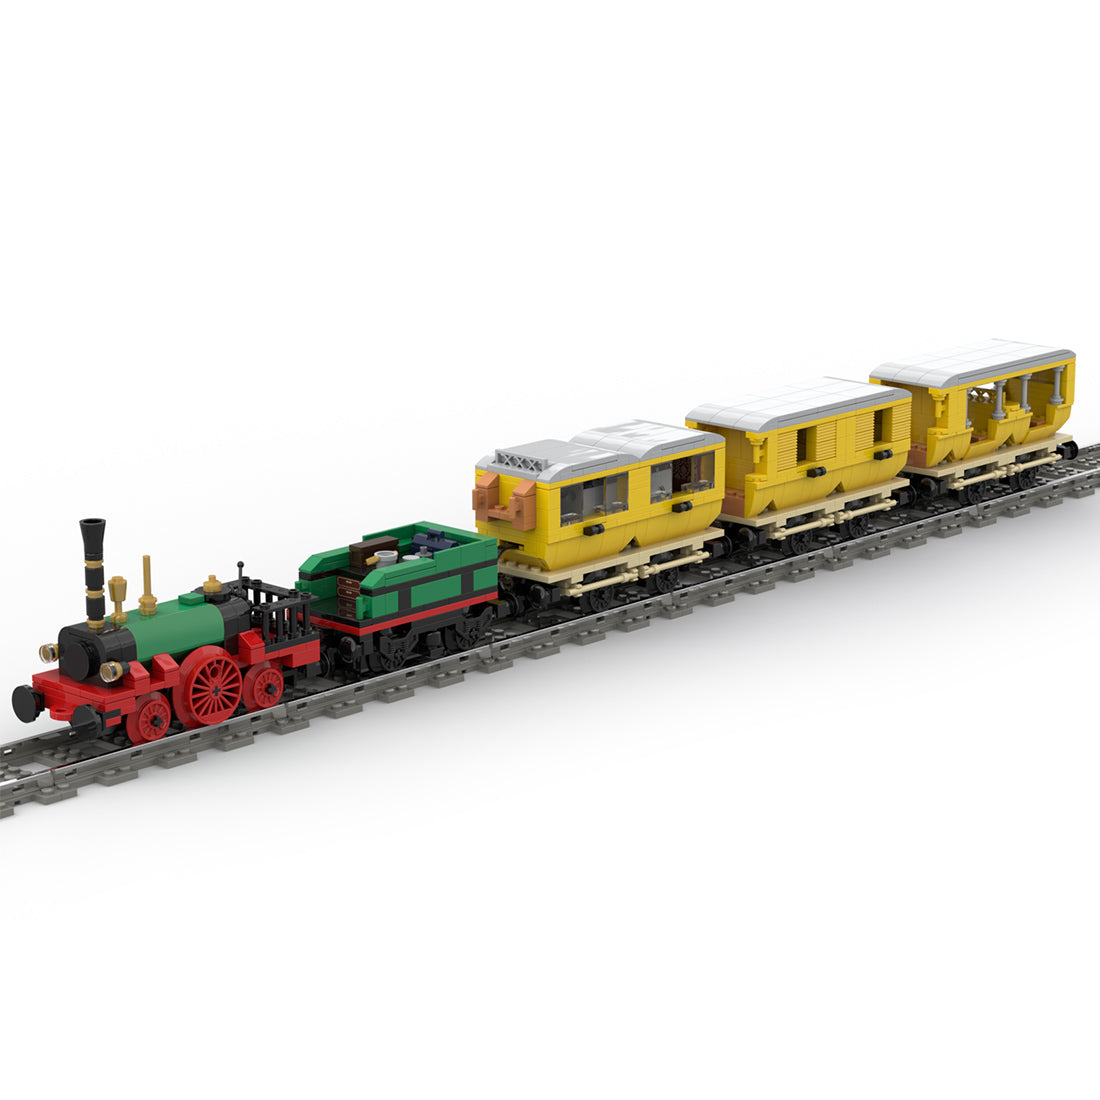 MOC-63396 The Adler – Germany’s first commercial train